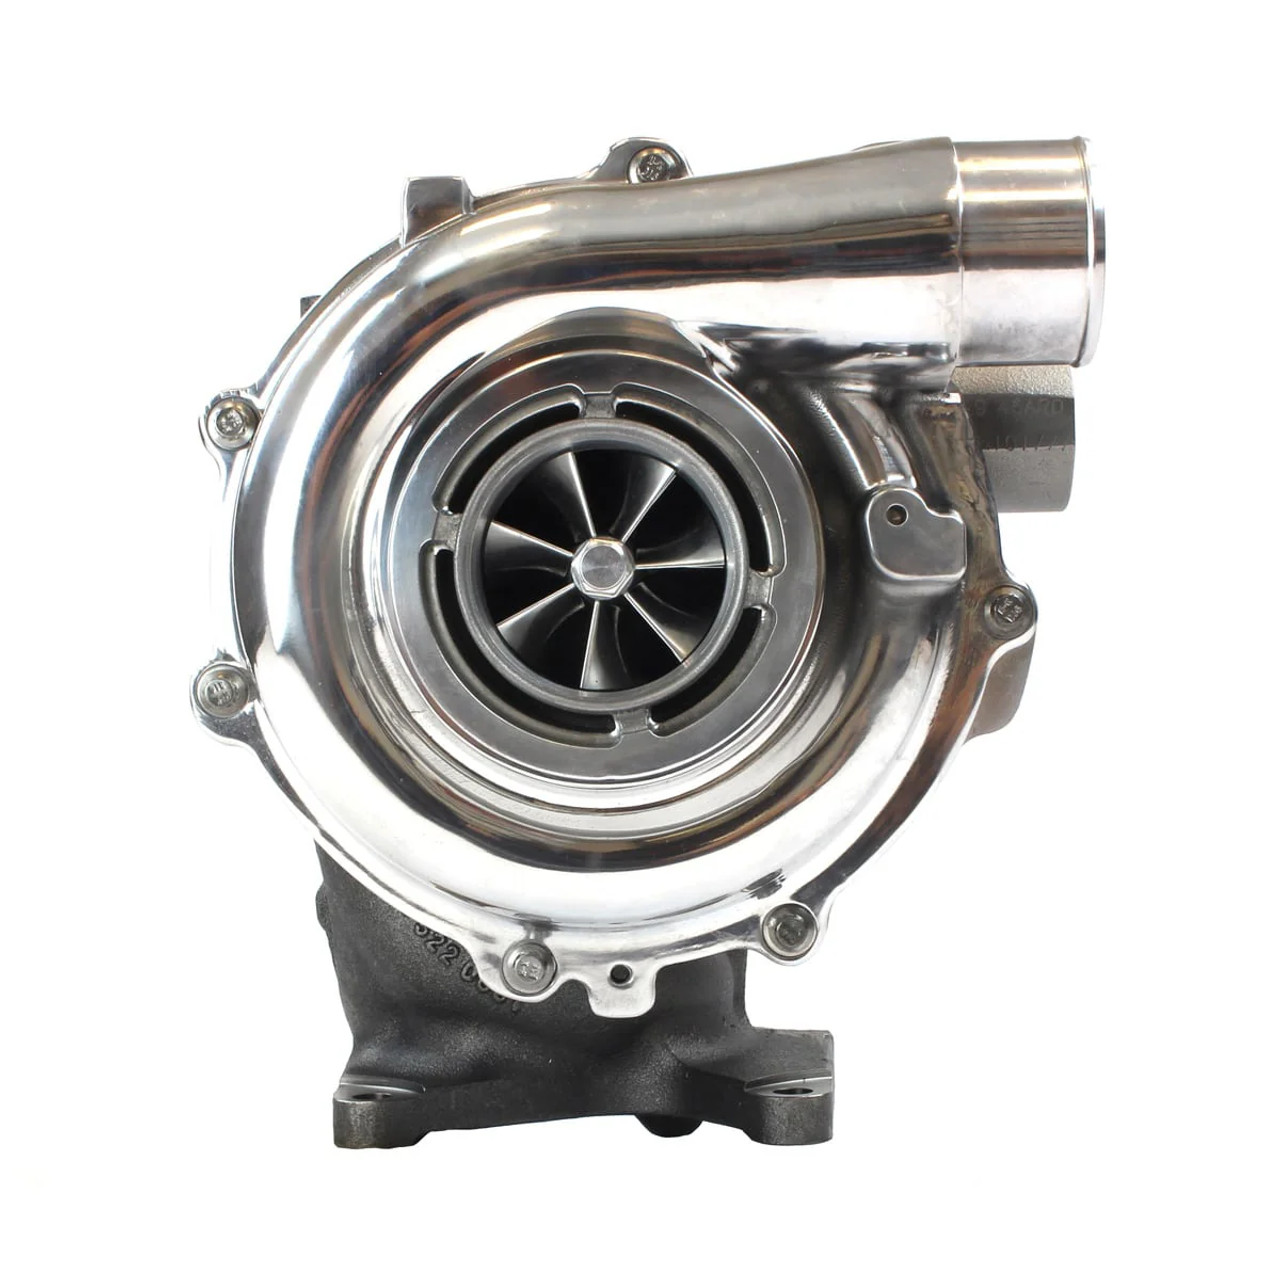  Industrial Injection XR2 Series Turbo 68MM for 2004.5 to 2010 6.6L LMM Duramax (773540-0001-XR2)Main View